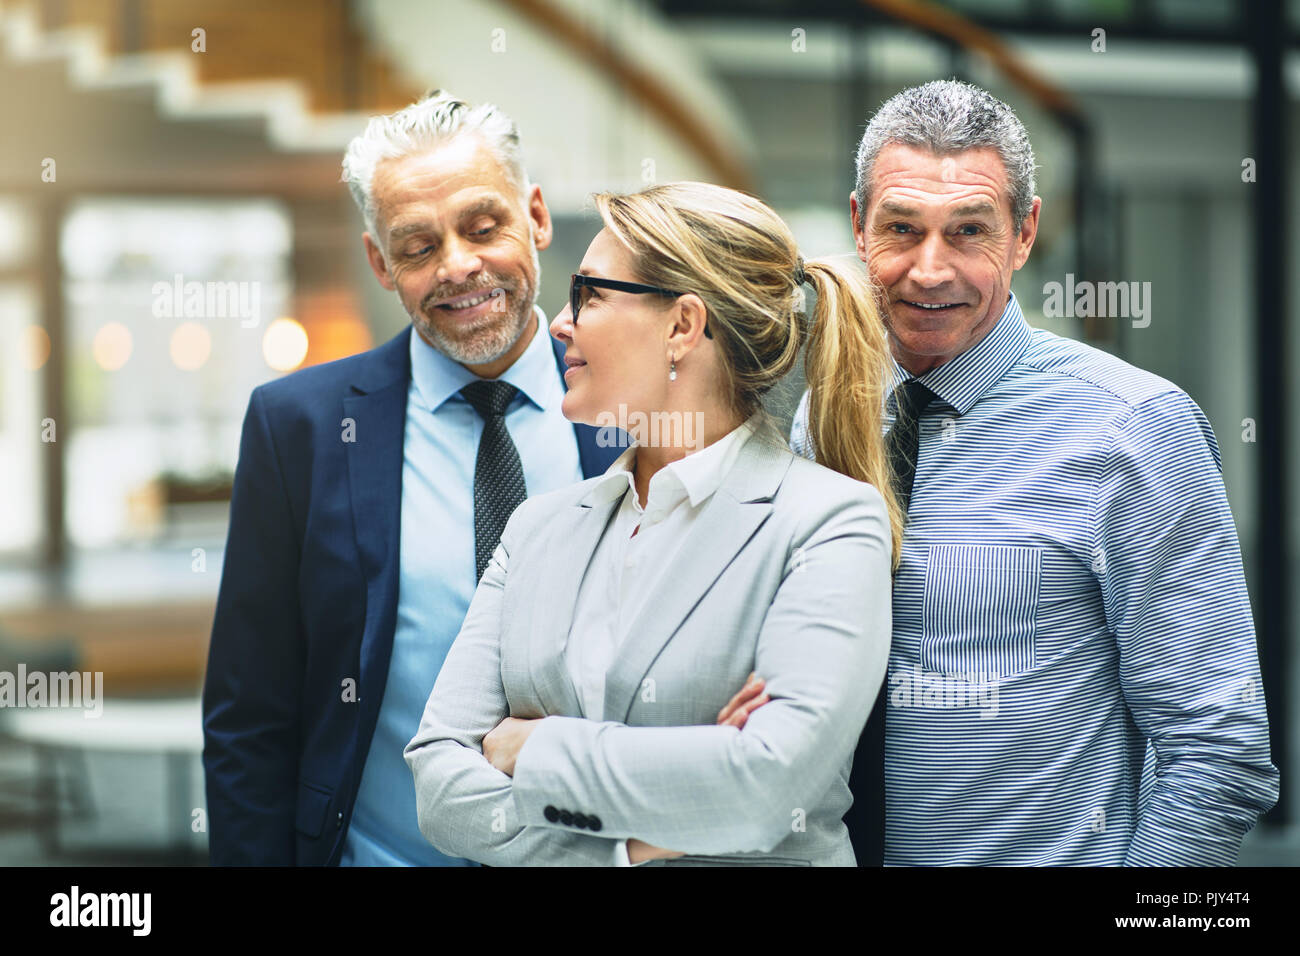 Smiling mature businesswoman talking with two male colleagues while standing together in the lobby of a modern office building Stock Photo